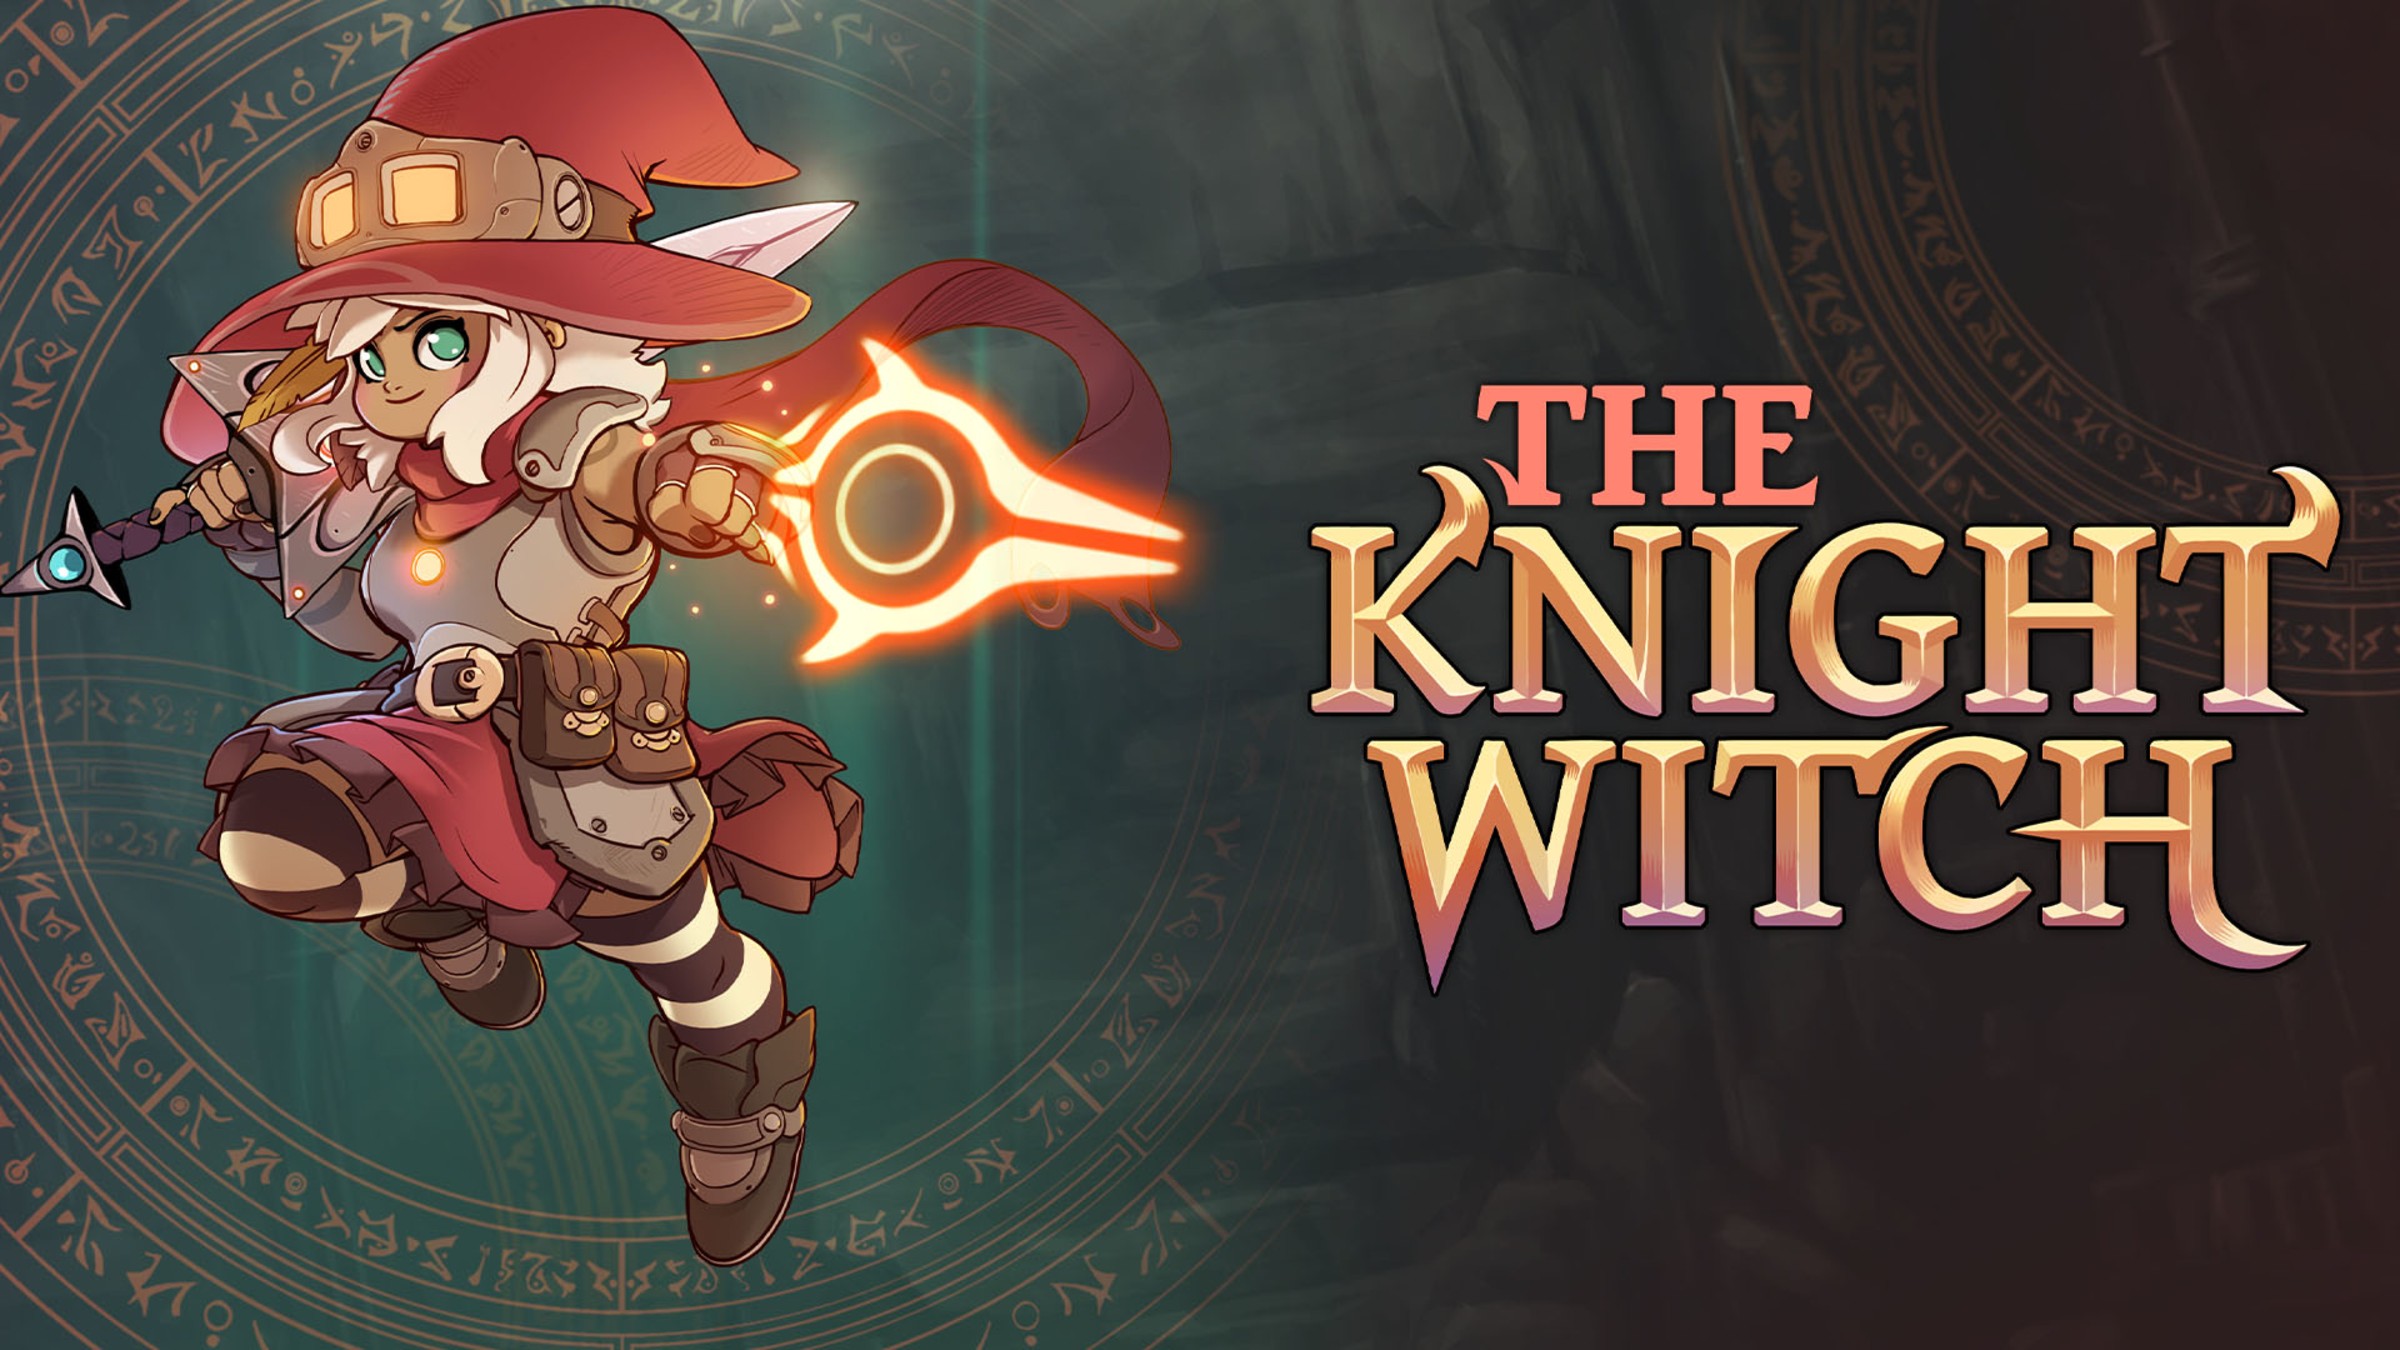 https://assets.nintendo.com/image/upload/c_fill,w_1200/q_auto:best/f_auto/dpr_2.0/ncom/en_US/games/switch/t/the-knight-witch-switch/